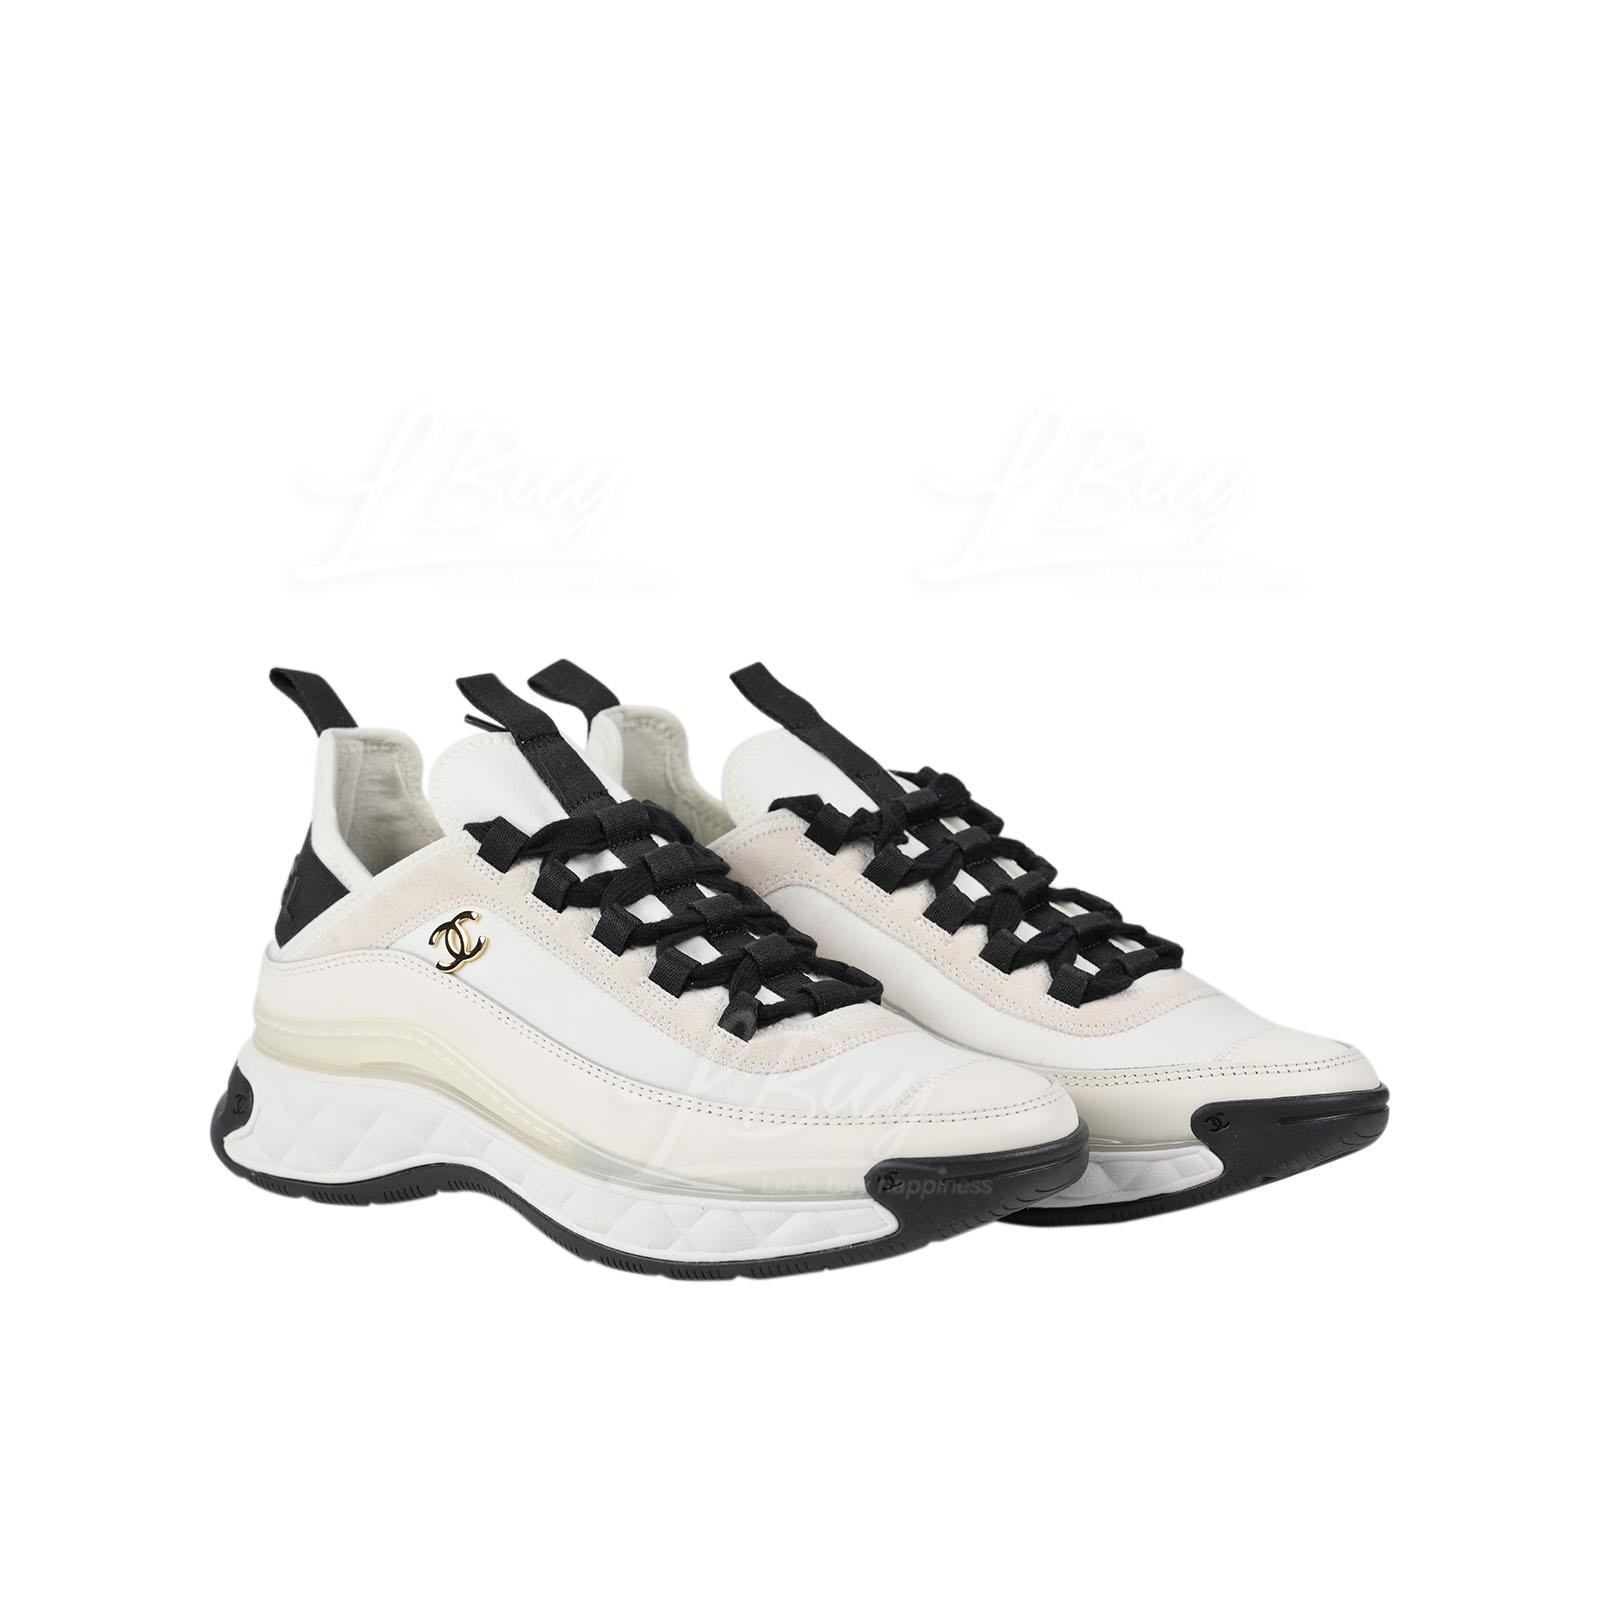 Chanel Black and White Suede Calfskin Sneaker